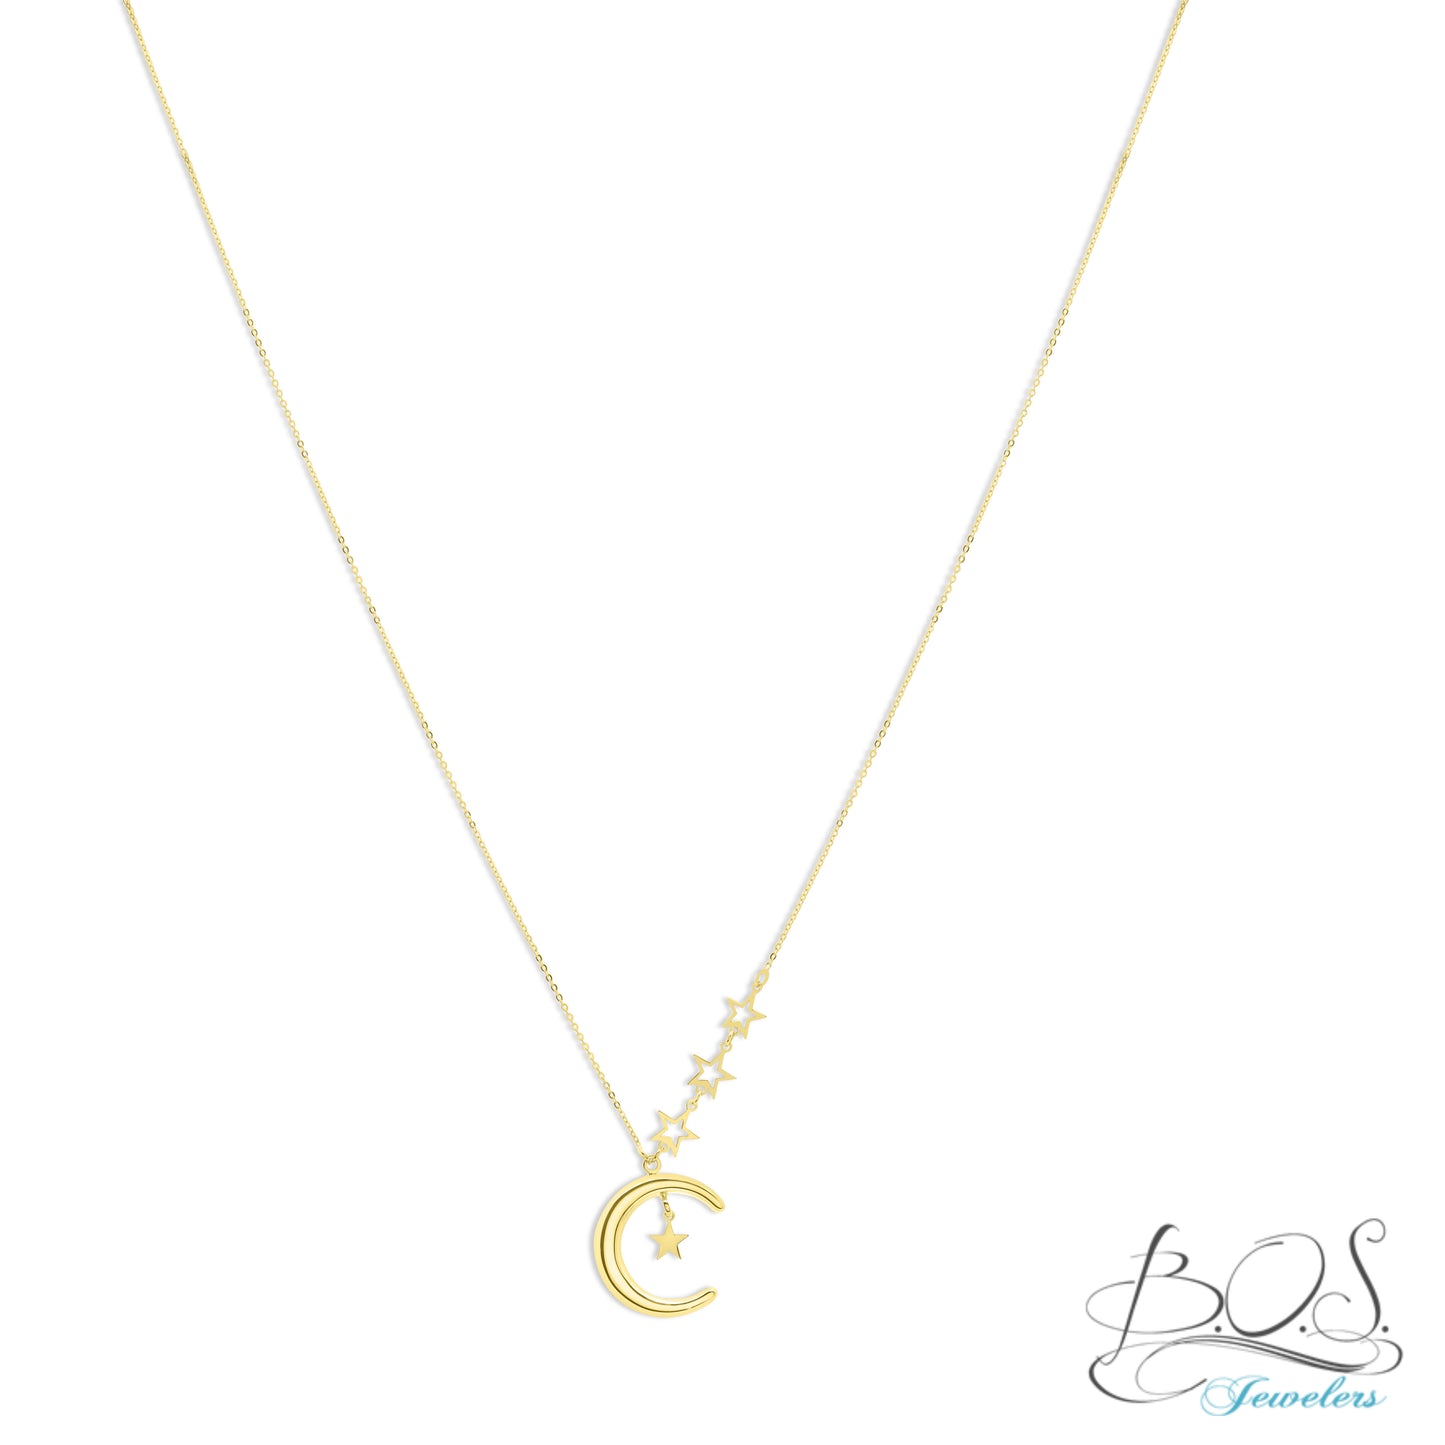 Crescent Moon Pendant with Star Accents Necklace 14KY Gold